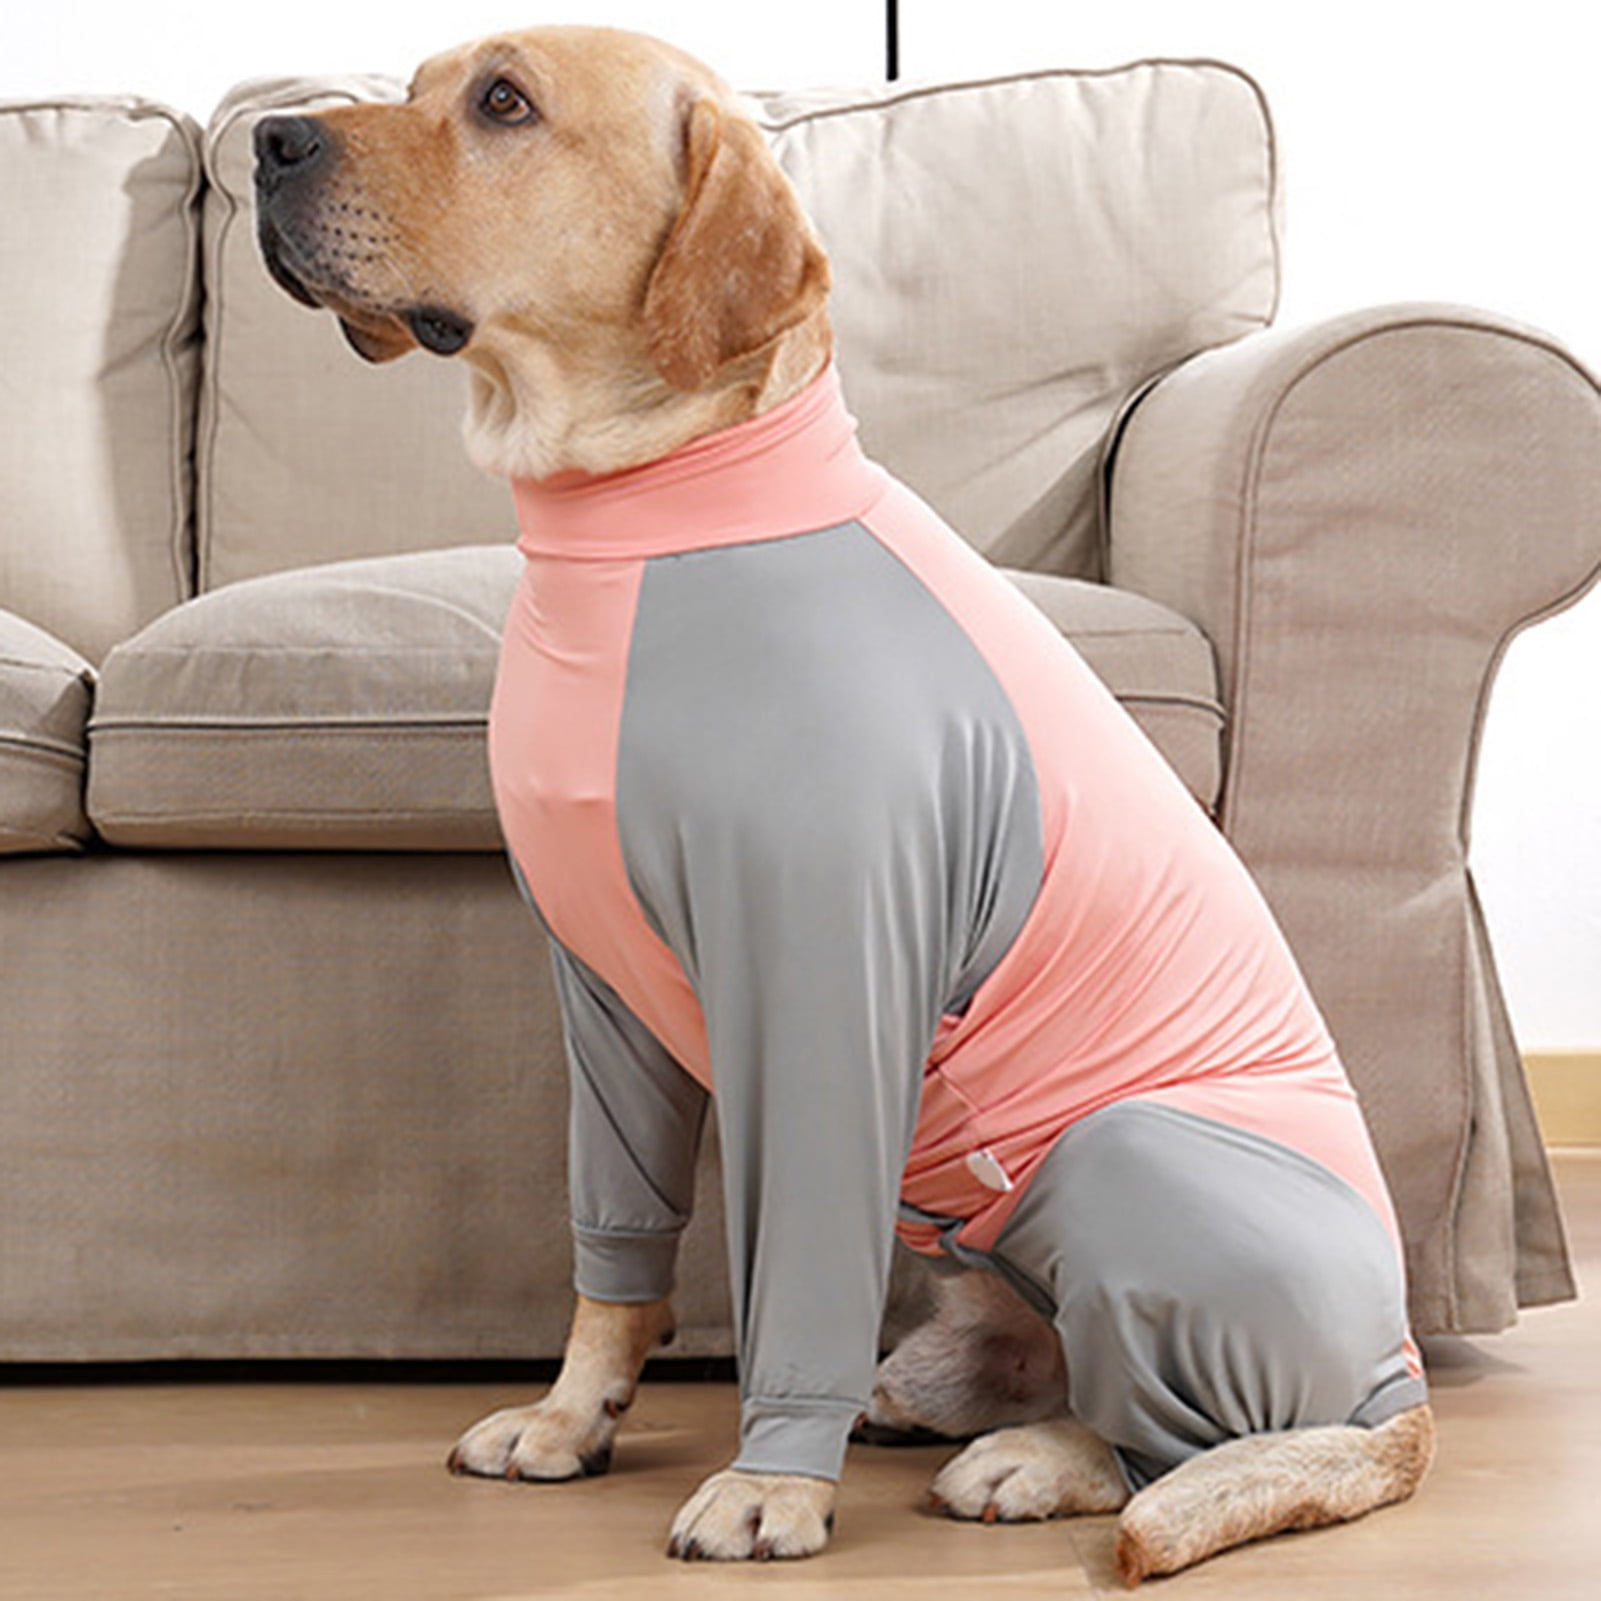 Comfort Your Dog After Surgery: The Top 10 Dog Onesies